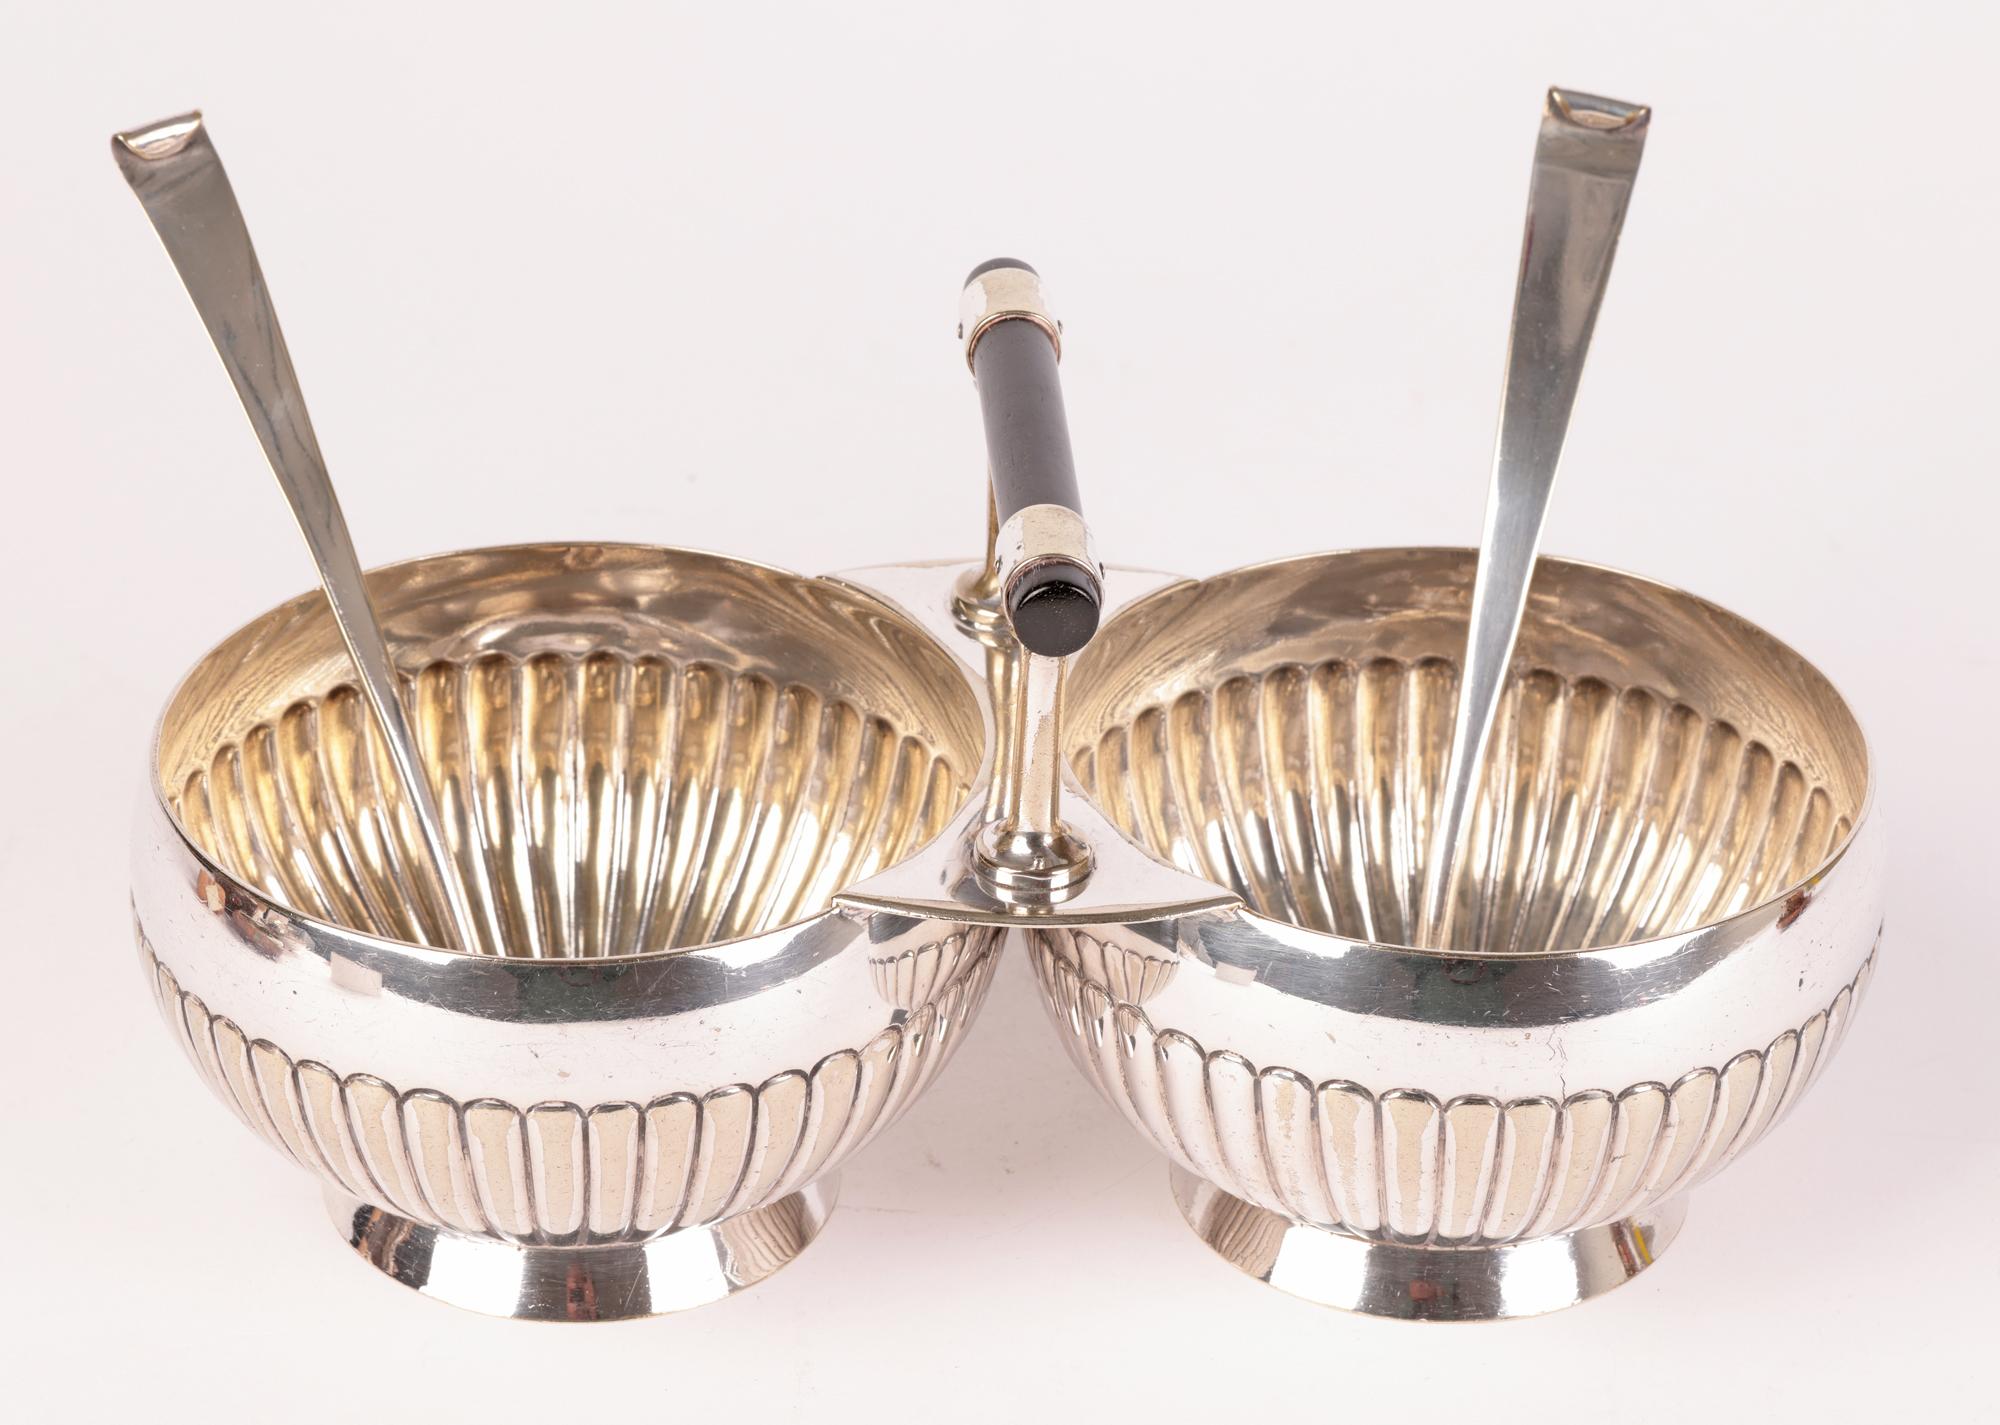 Christopher Dresser for Hukin & Heath Silver Plated Sugar Bowl with Ladles 8